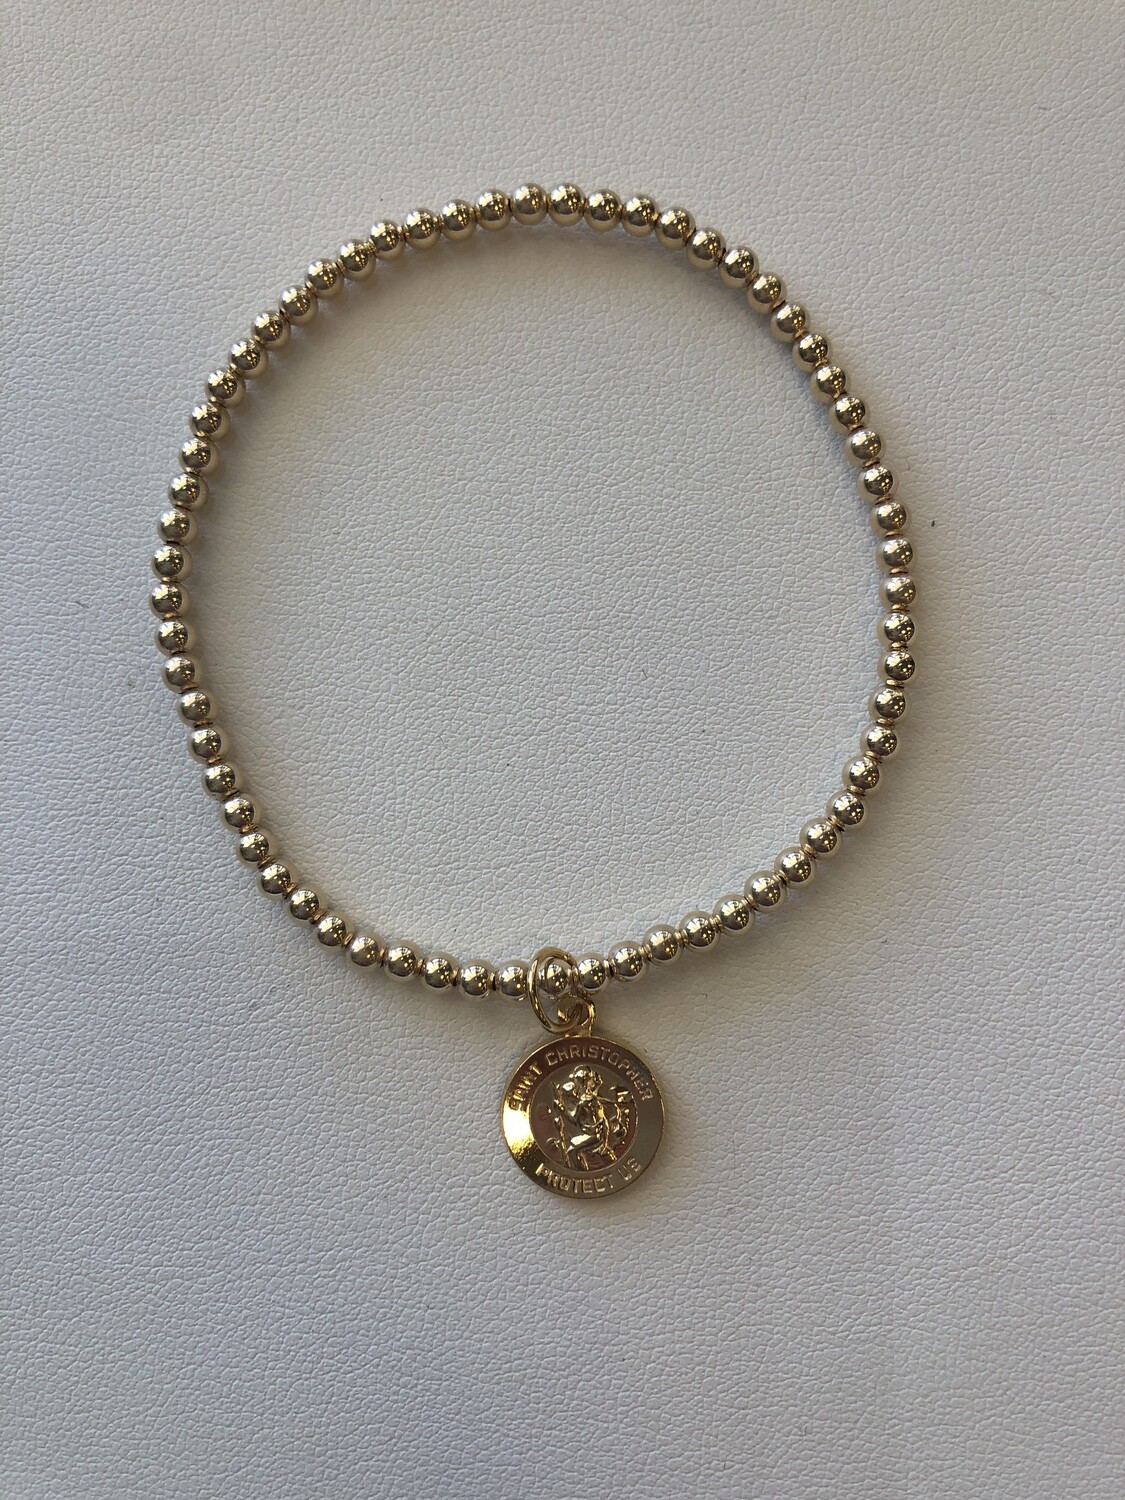 Classic Gold 3mm Bead Bracelet, Protection Gold Disk